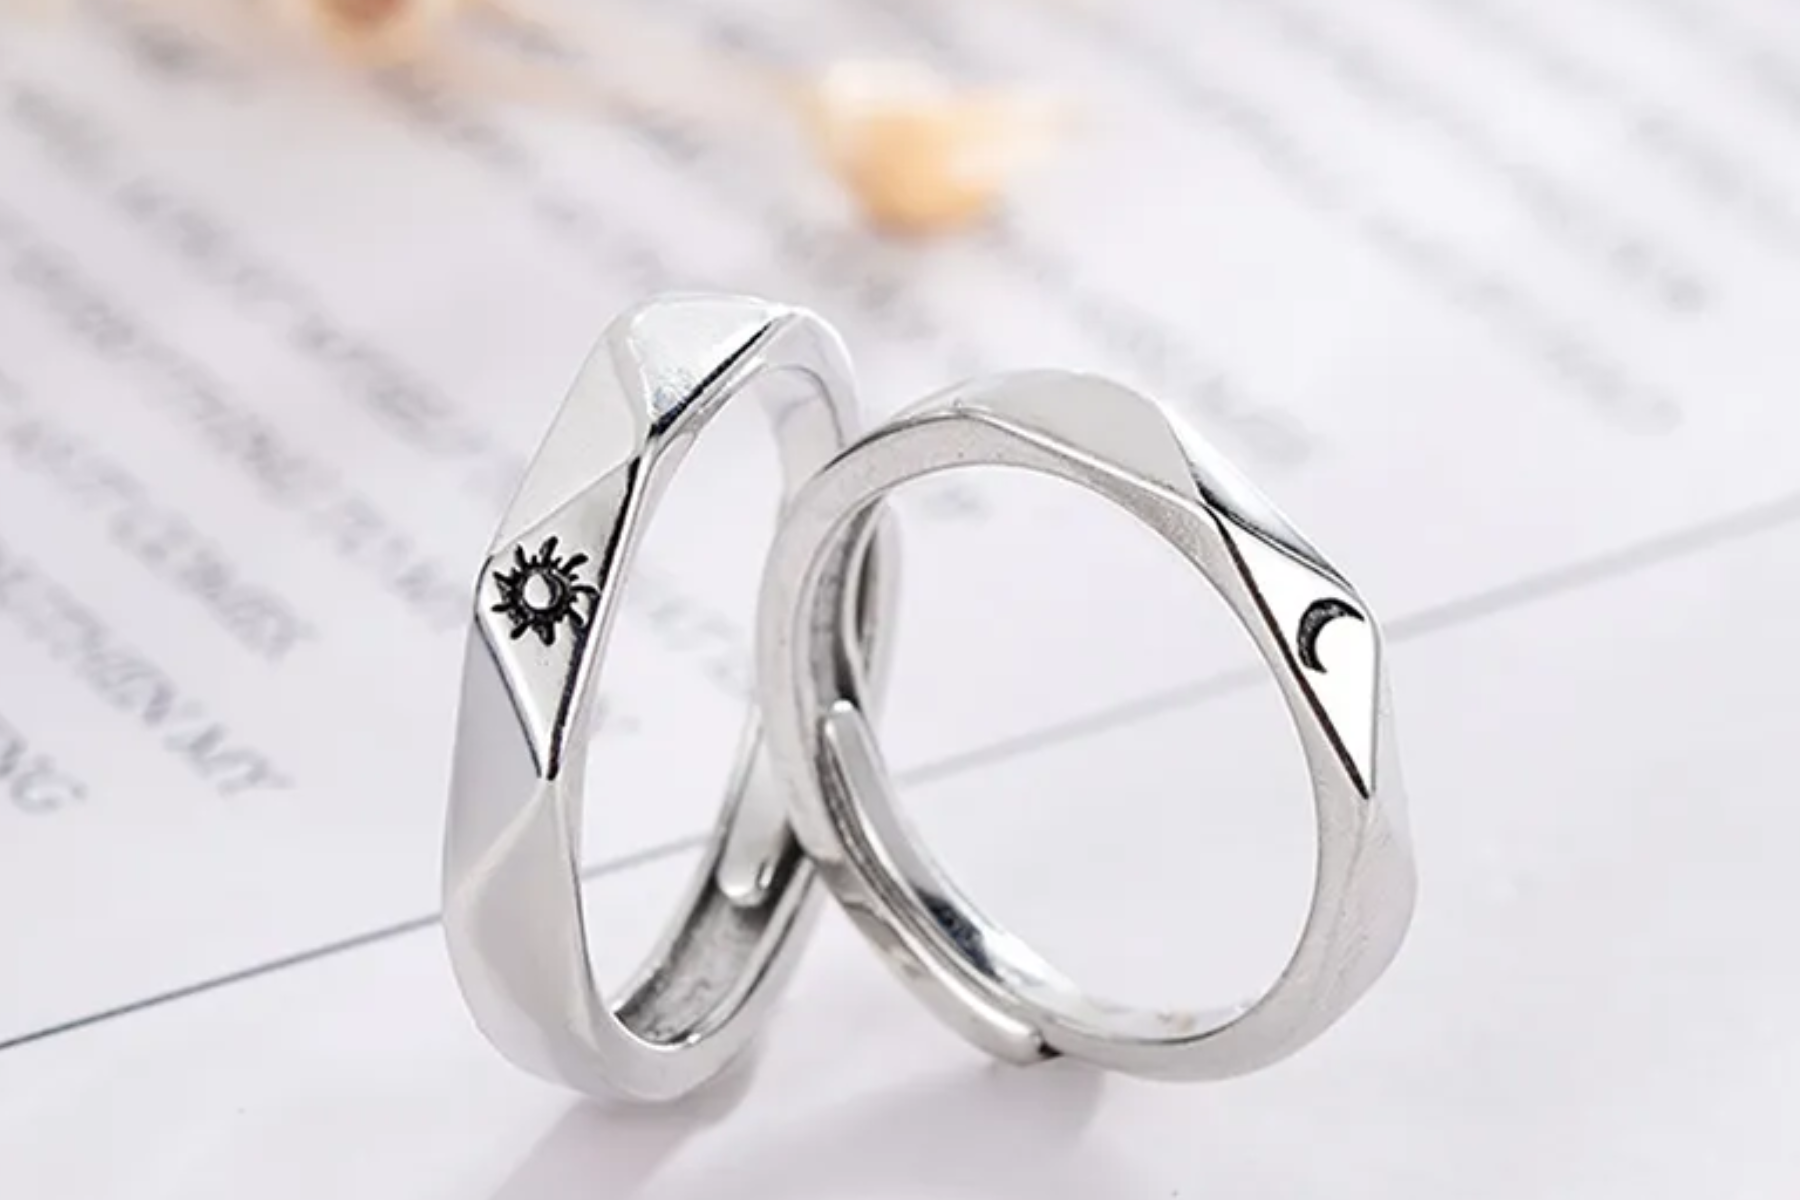 Platinum Jewelry With Moon And Sun Symbols - Celestial Designs